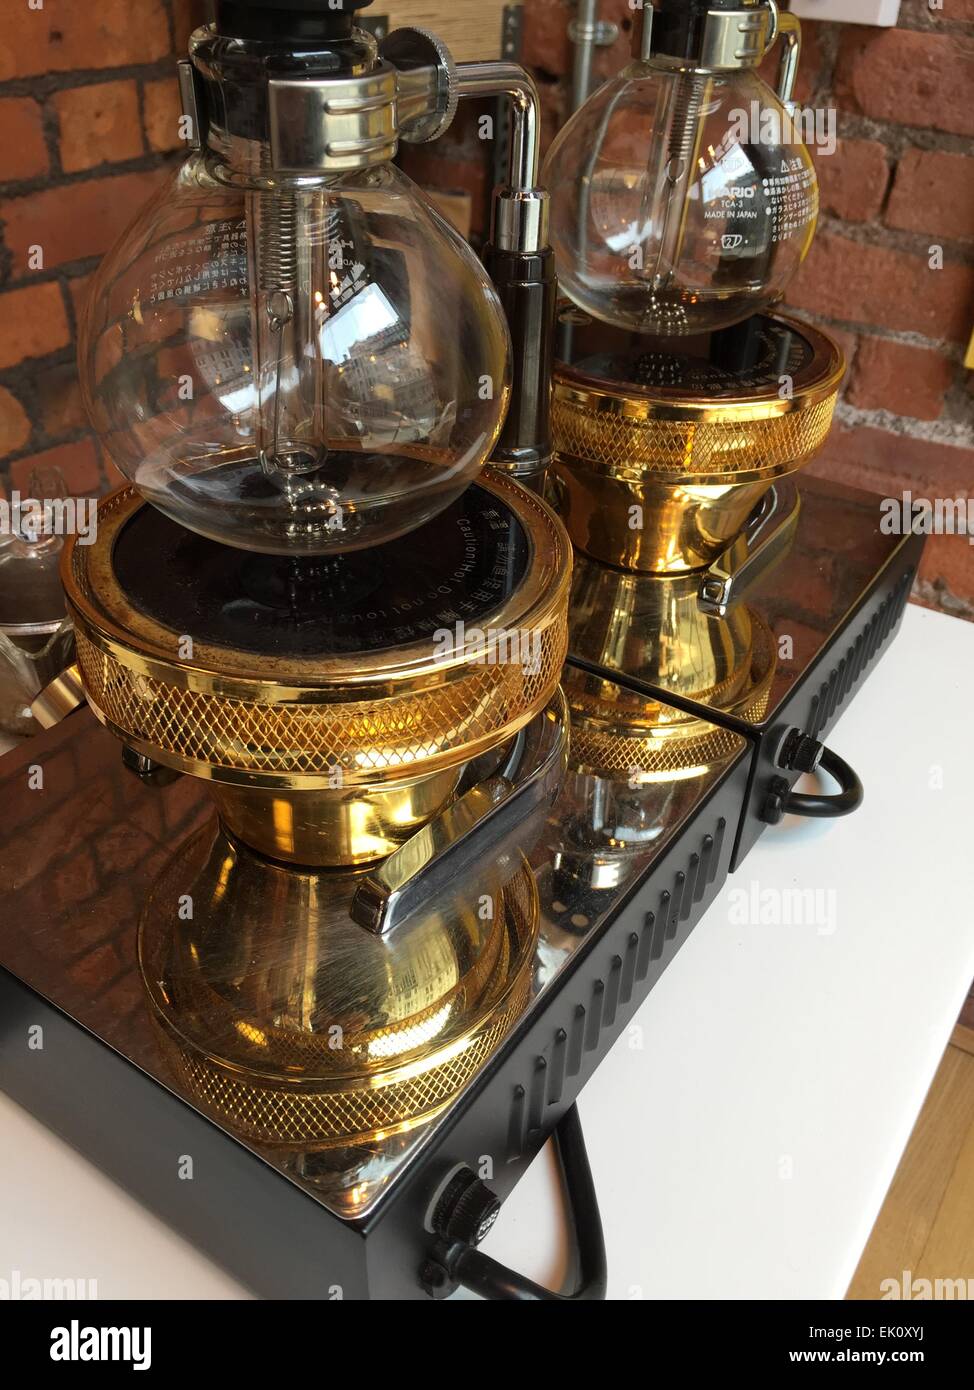 Japanese Siphon Coffee Maker With Halogen Beam Heater Stock Photo